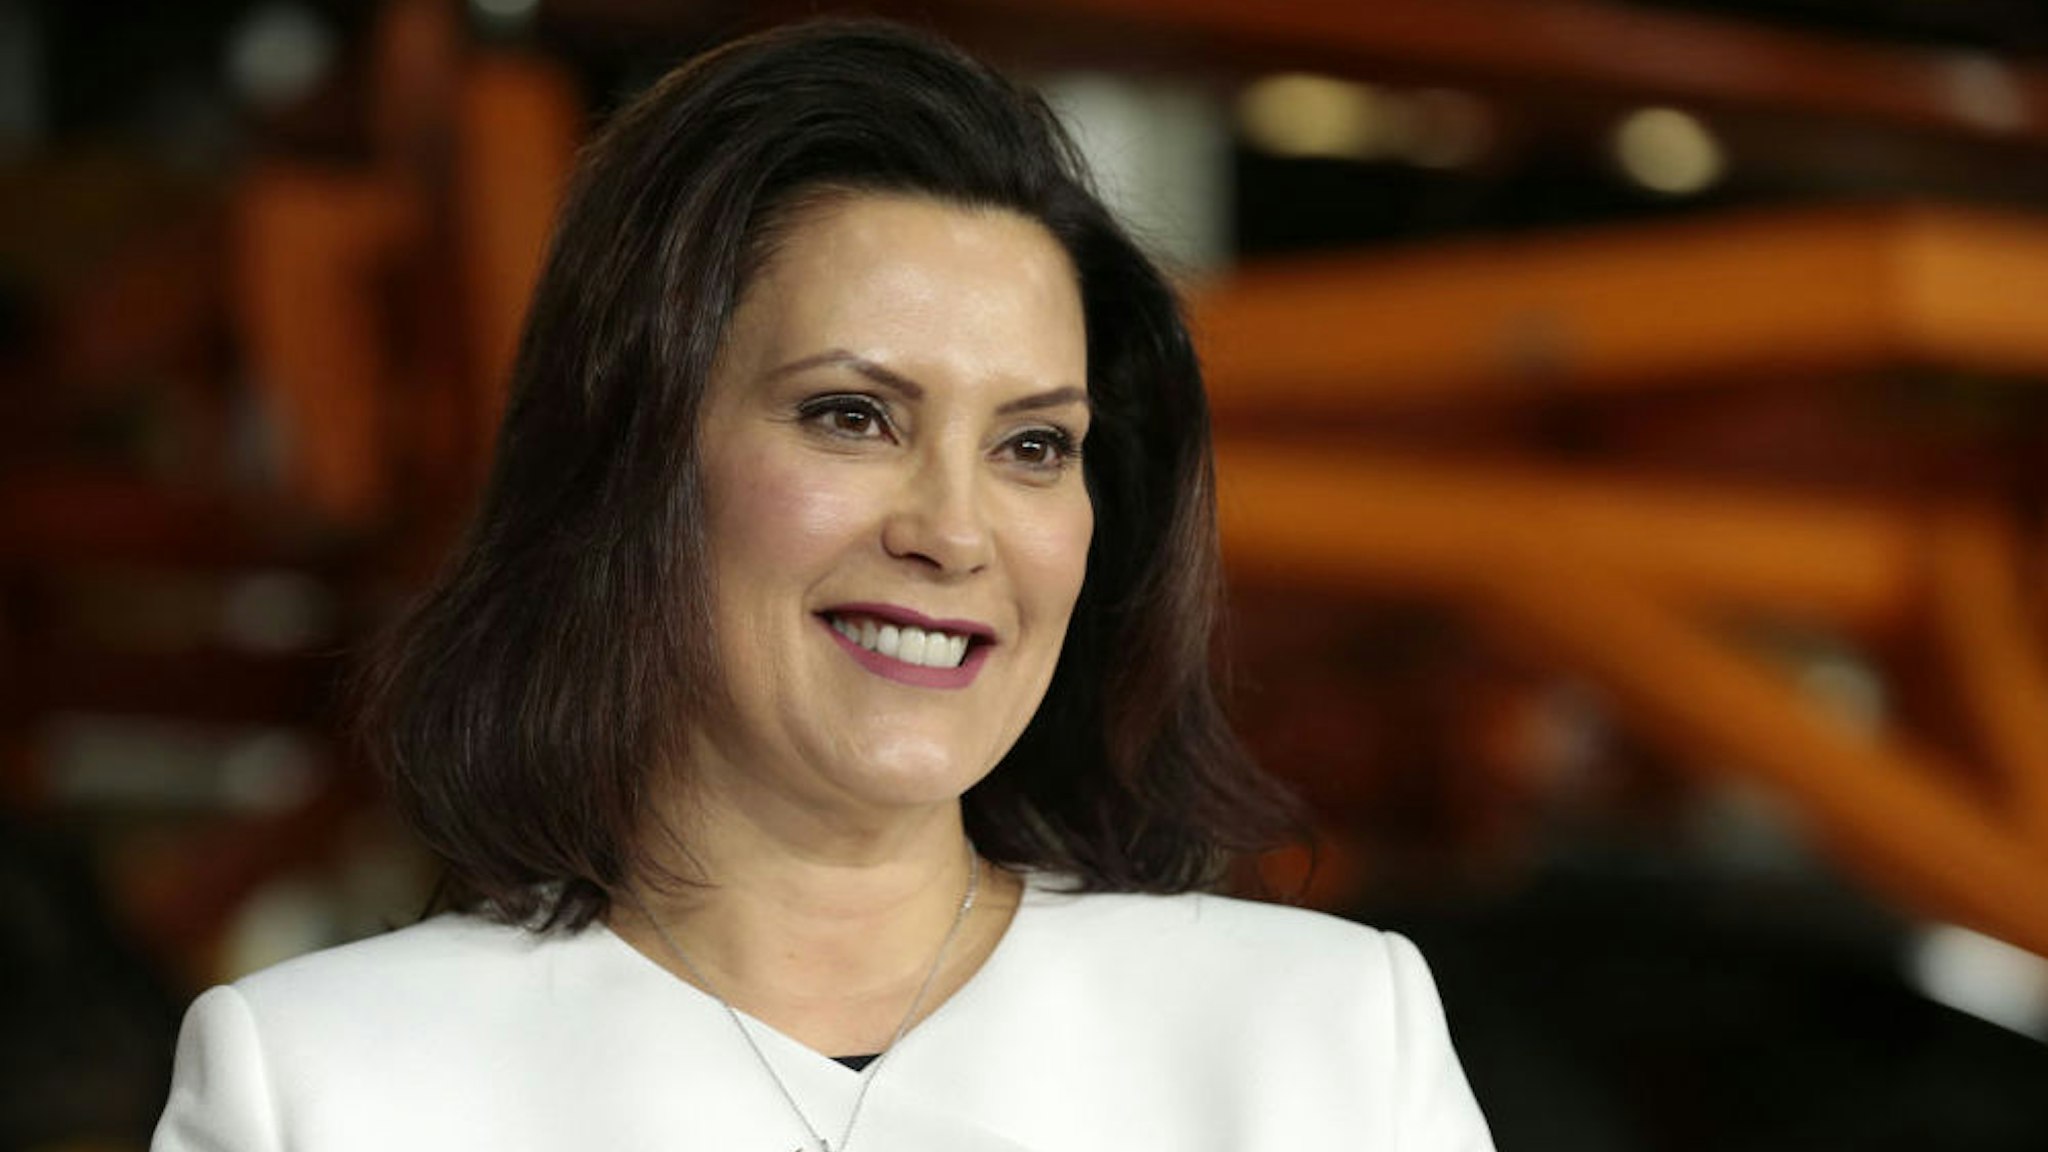 Gretchen Whitmer, governor of Michigan, smiles during an event at the General Motors Co. Orion Assembly plant in Orion Township, Michigan, U.S., on Friday, March 22, 2019. General Motors Co. committed to investing $1.8 billion at plants in six states and to creating 700 new jobs, as the largest U.S. automaker looks to ward off months of criticism by President Donald Trump.